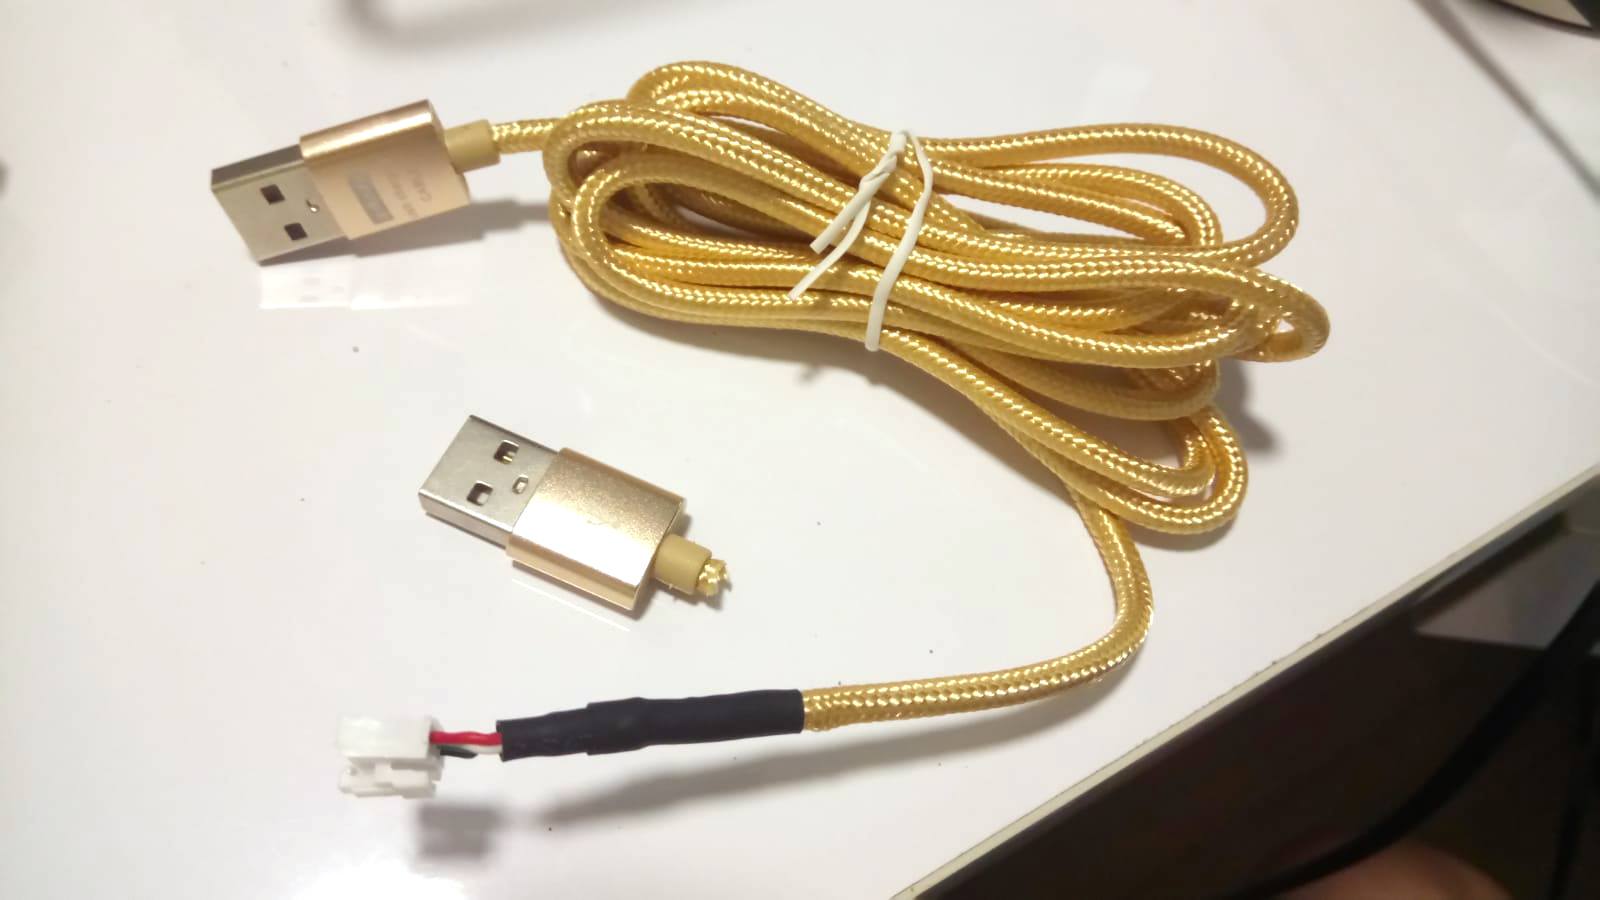 Shiny golden USB cable